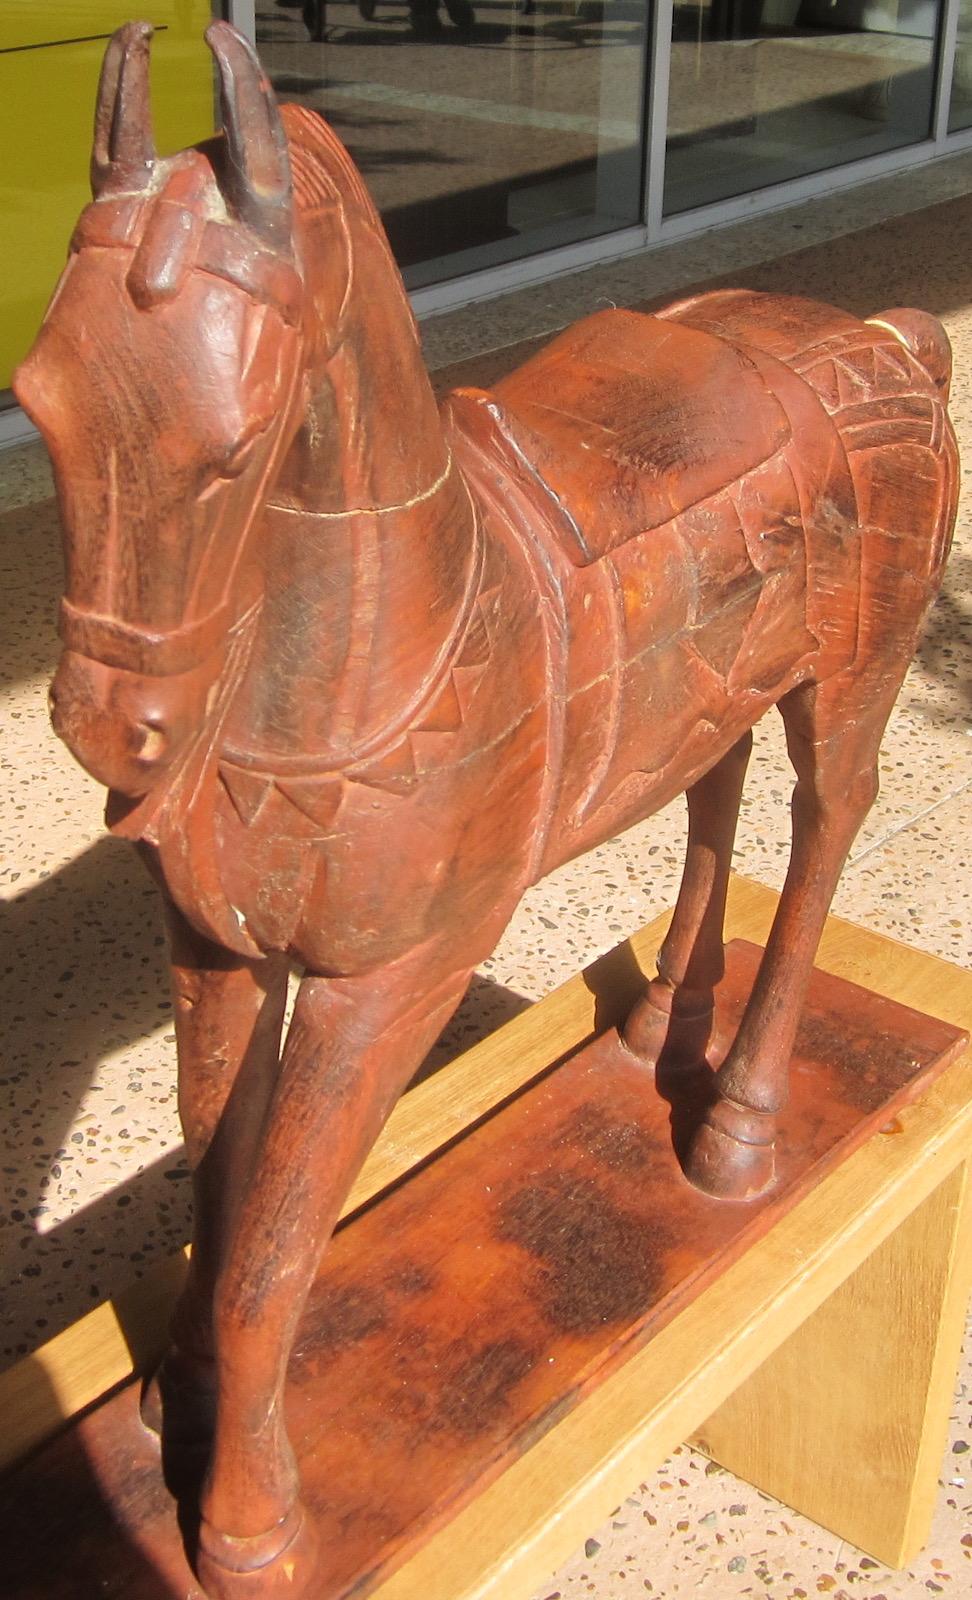 Japanese vintage carved wood horse, on a wooden base.
Our eclectic stock crosses cultures, continents, styles and famous names.